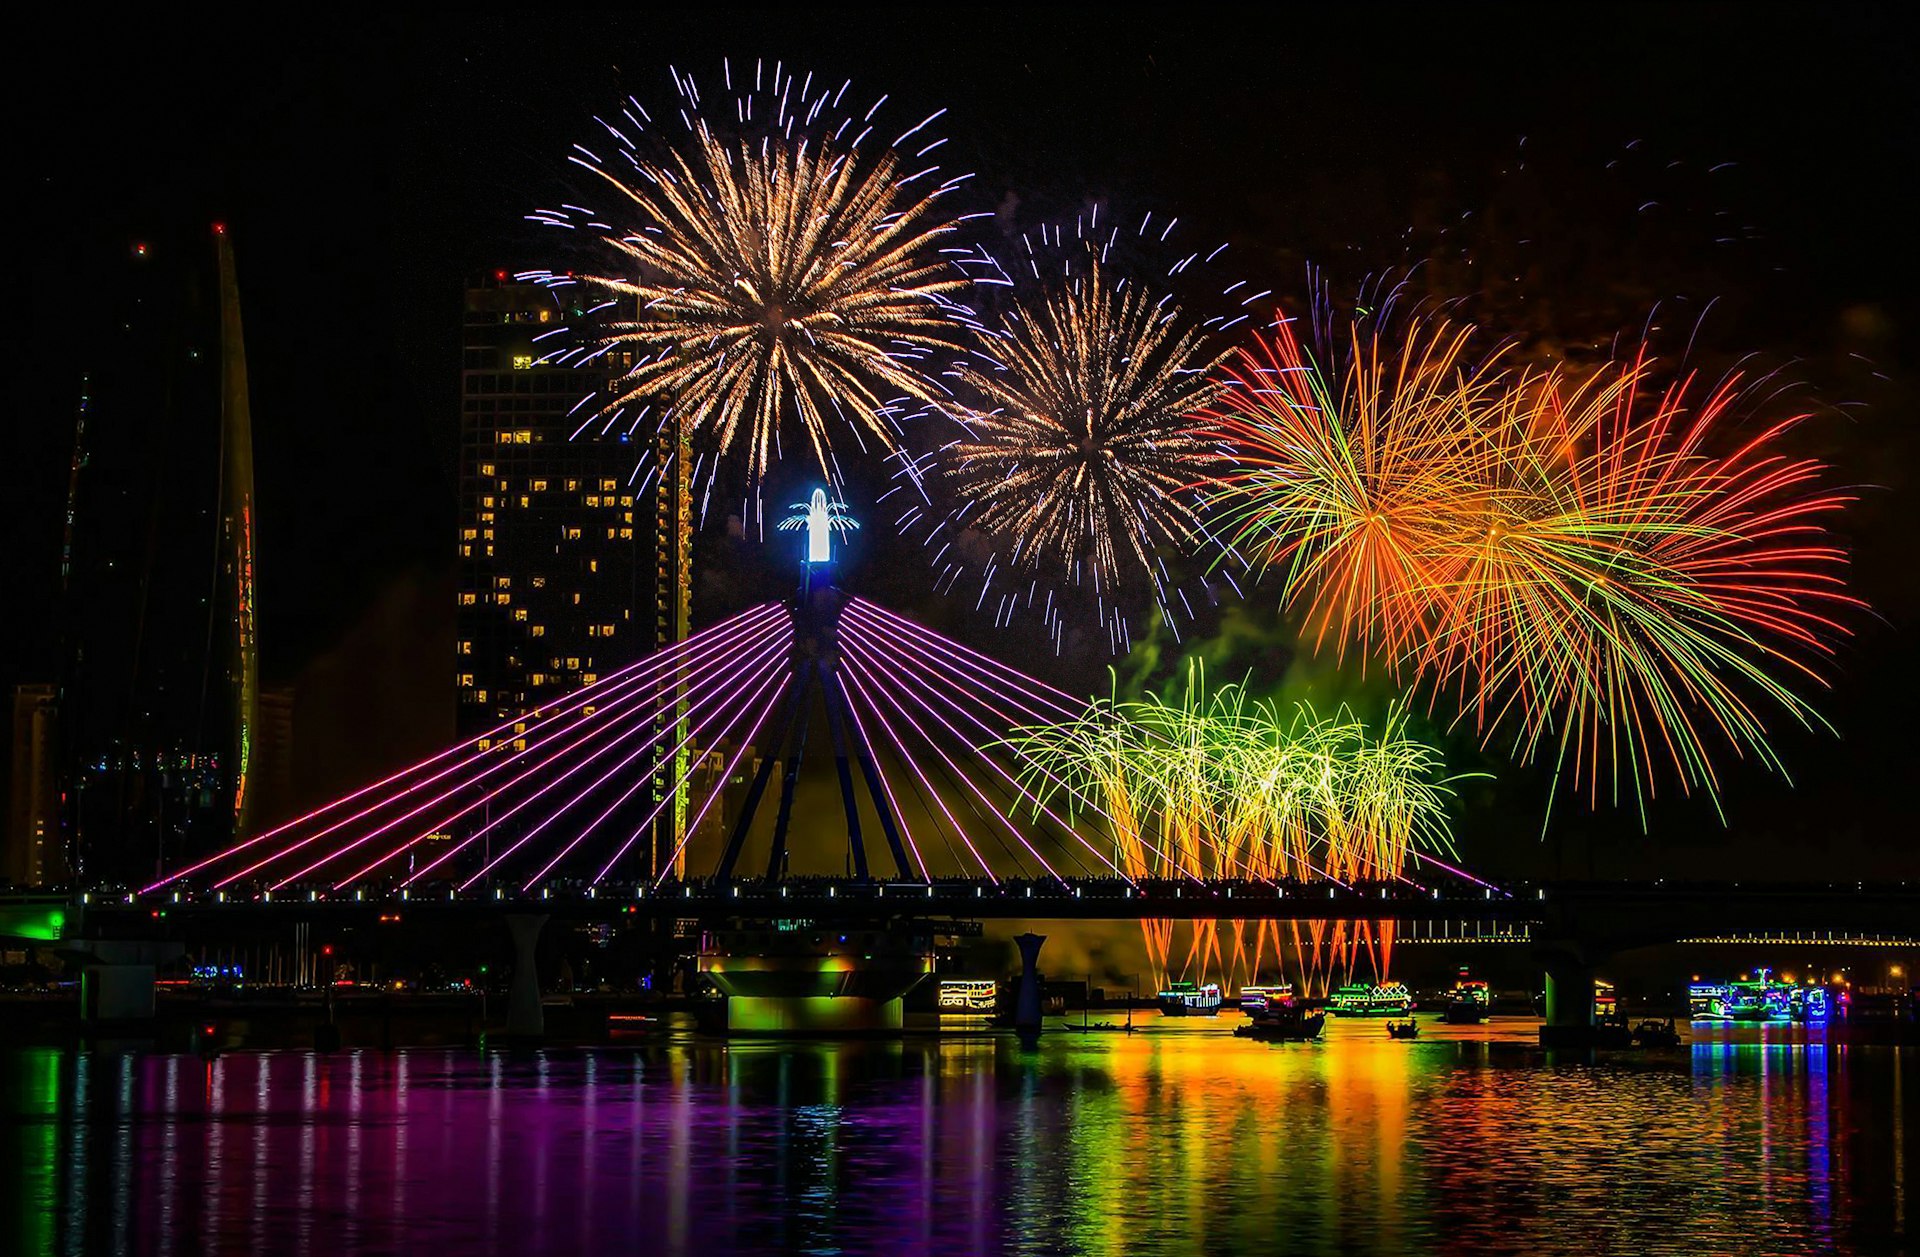 Colourful fireworks illuminate the night sky above the Han River in Danang, Vietnam.